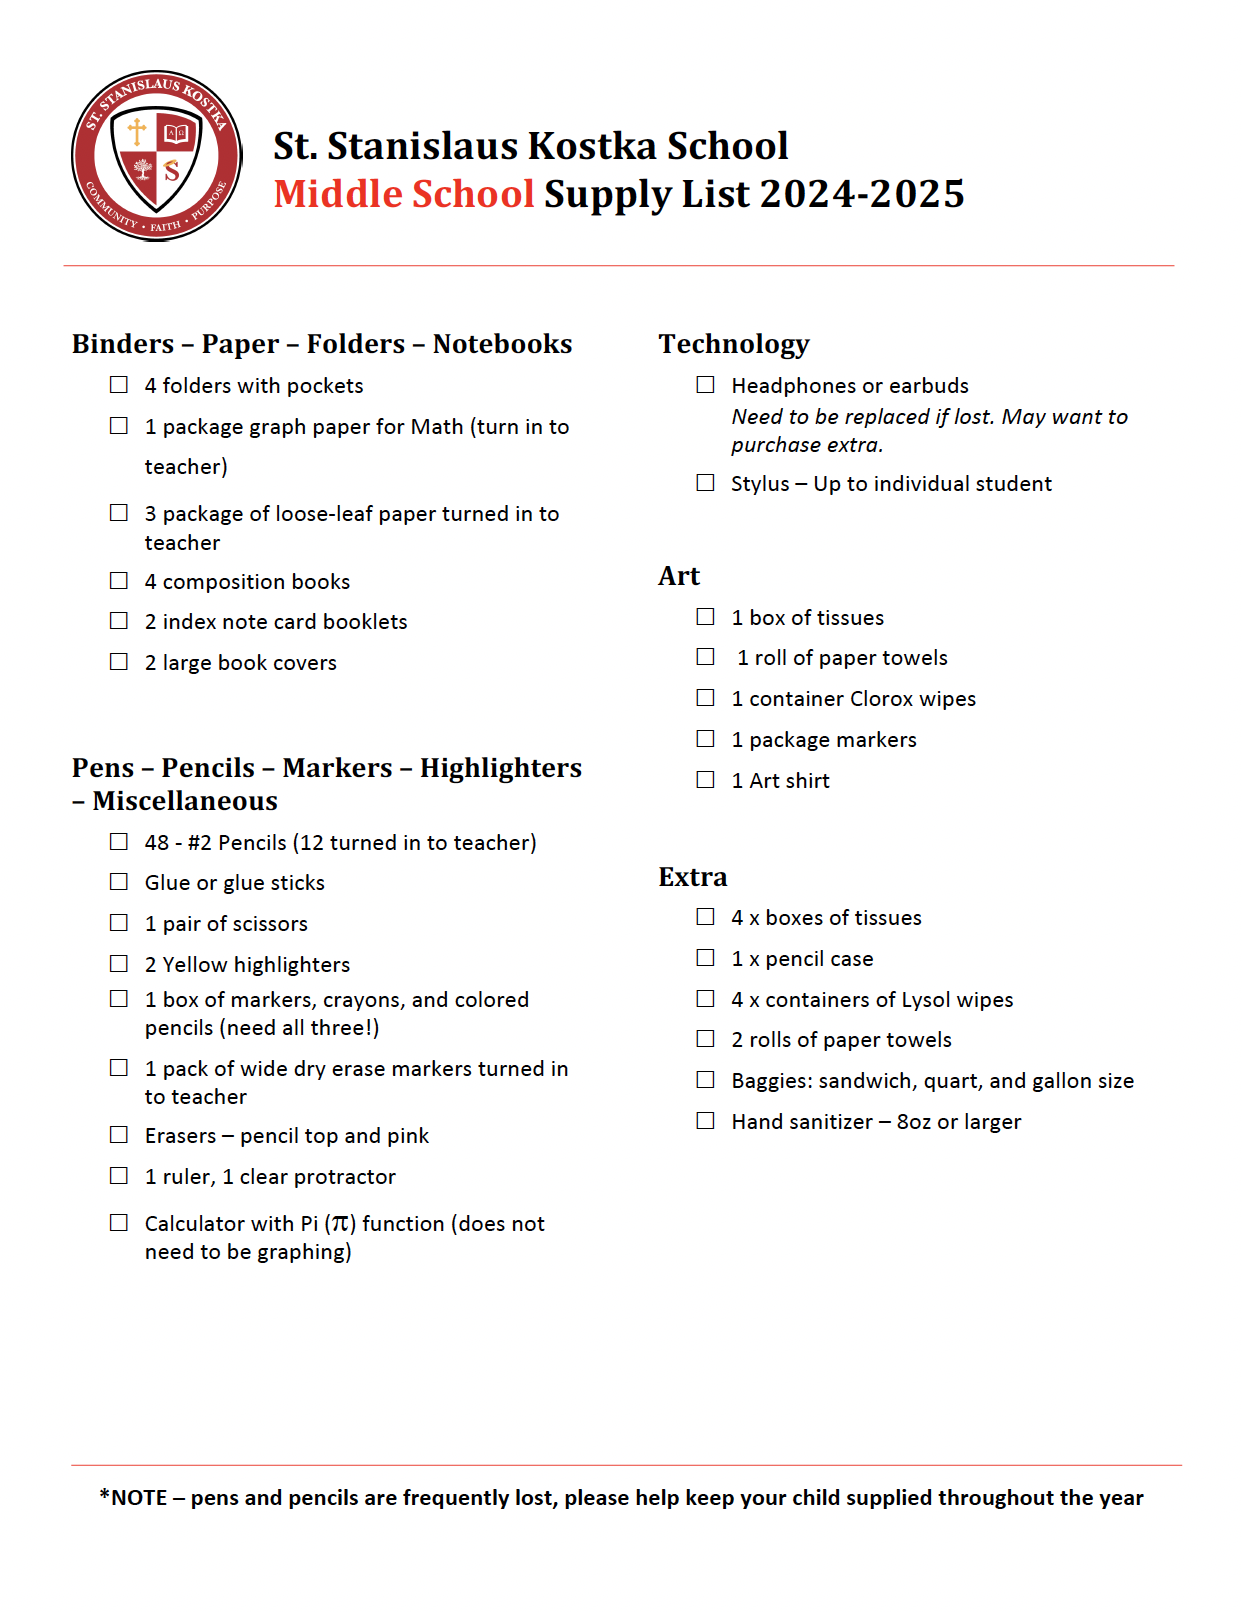 2024-2025 Middle School Supply List